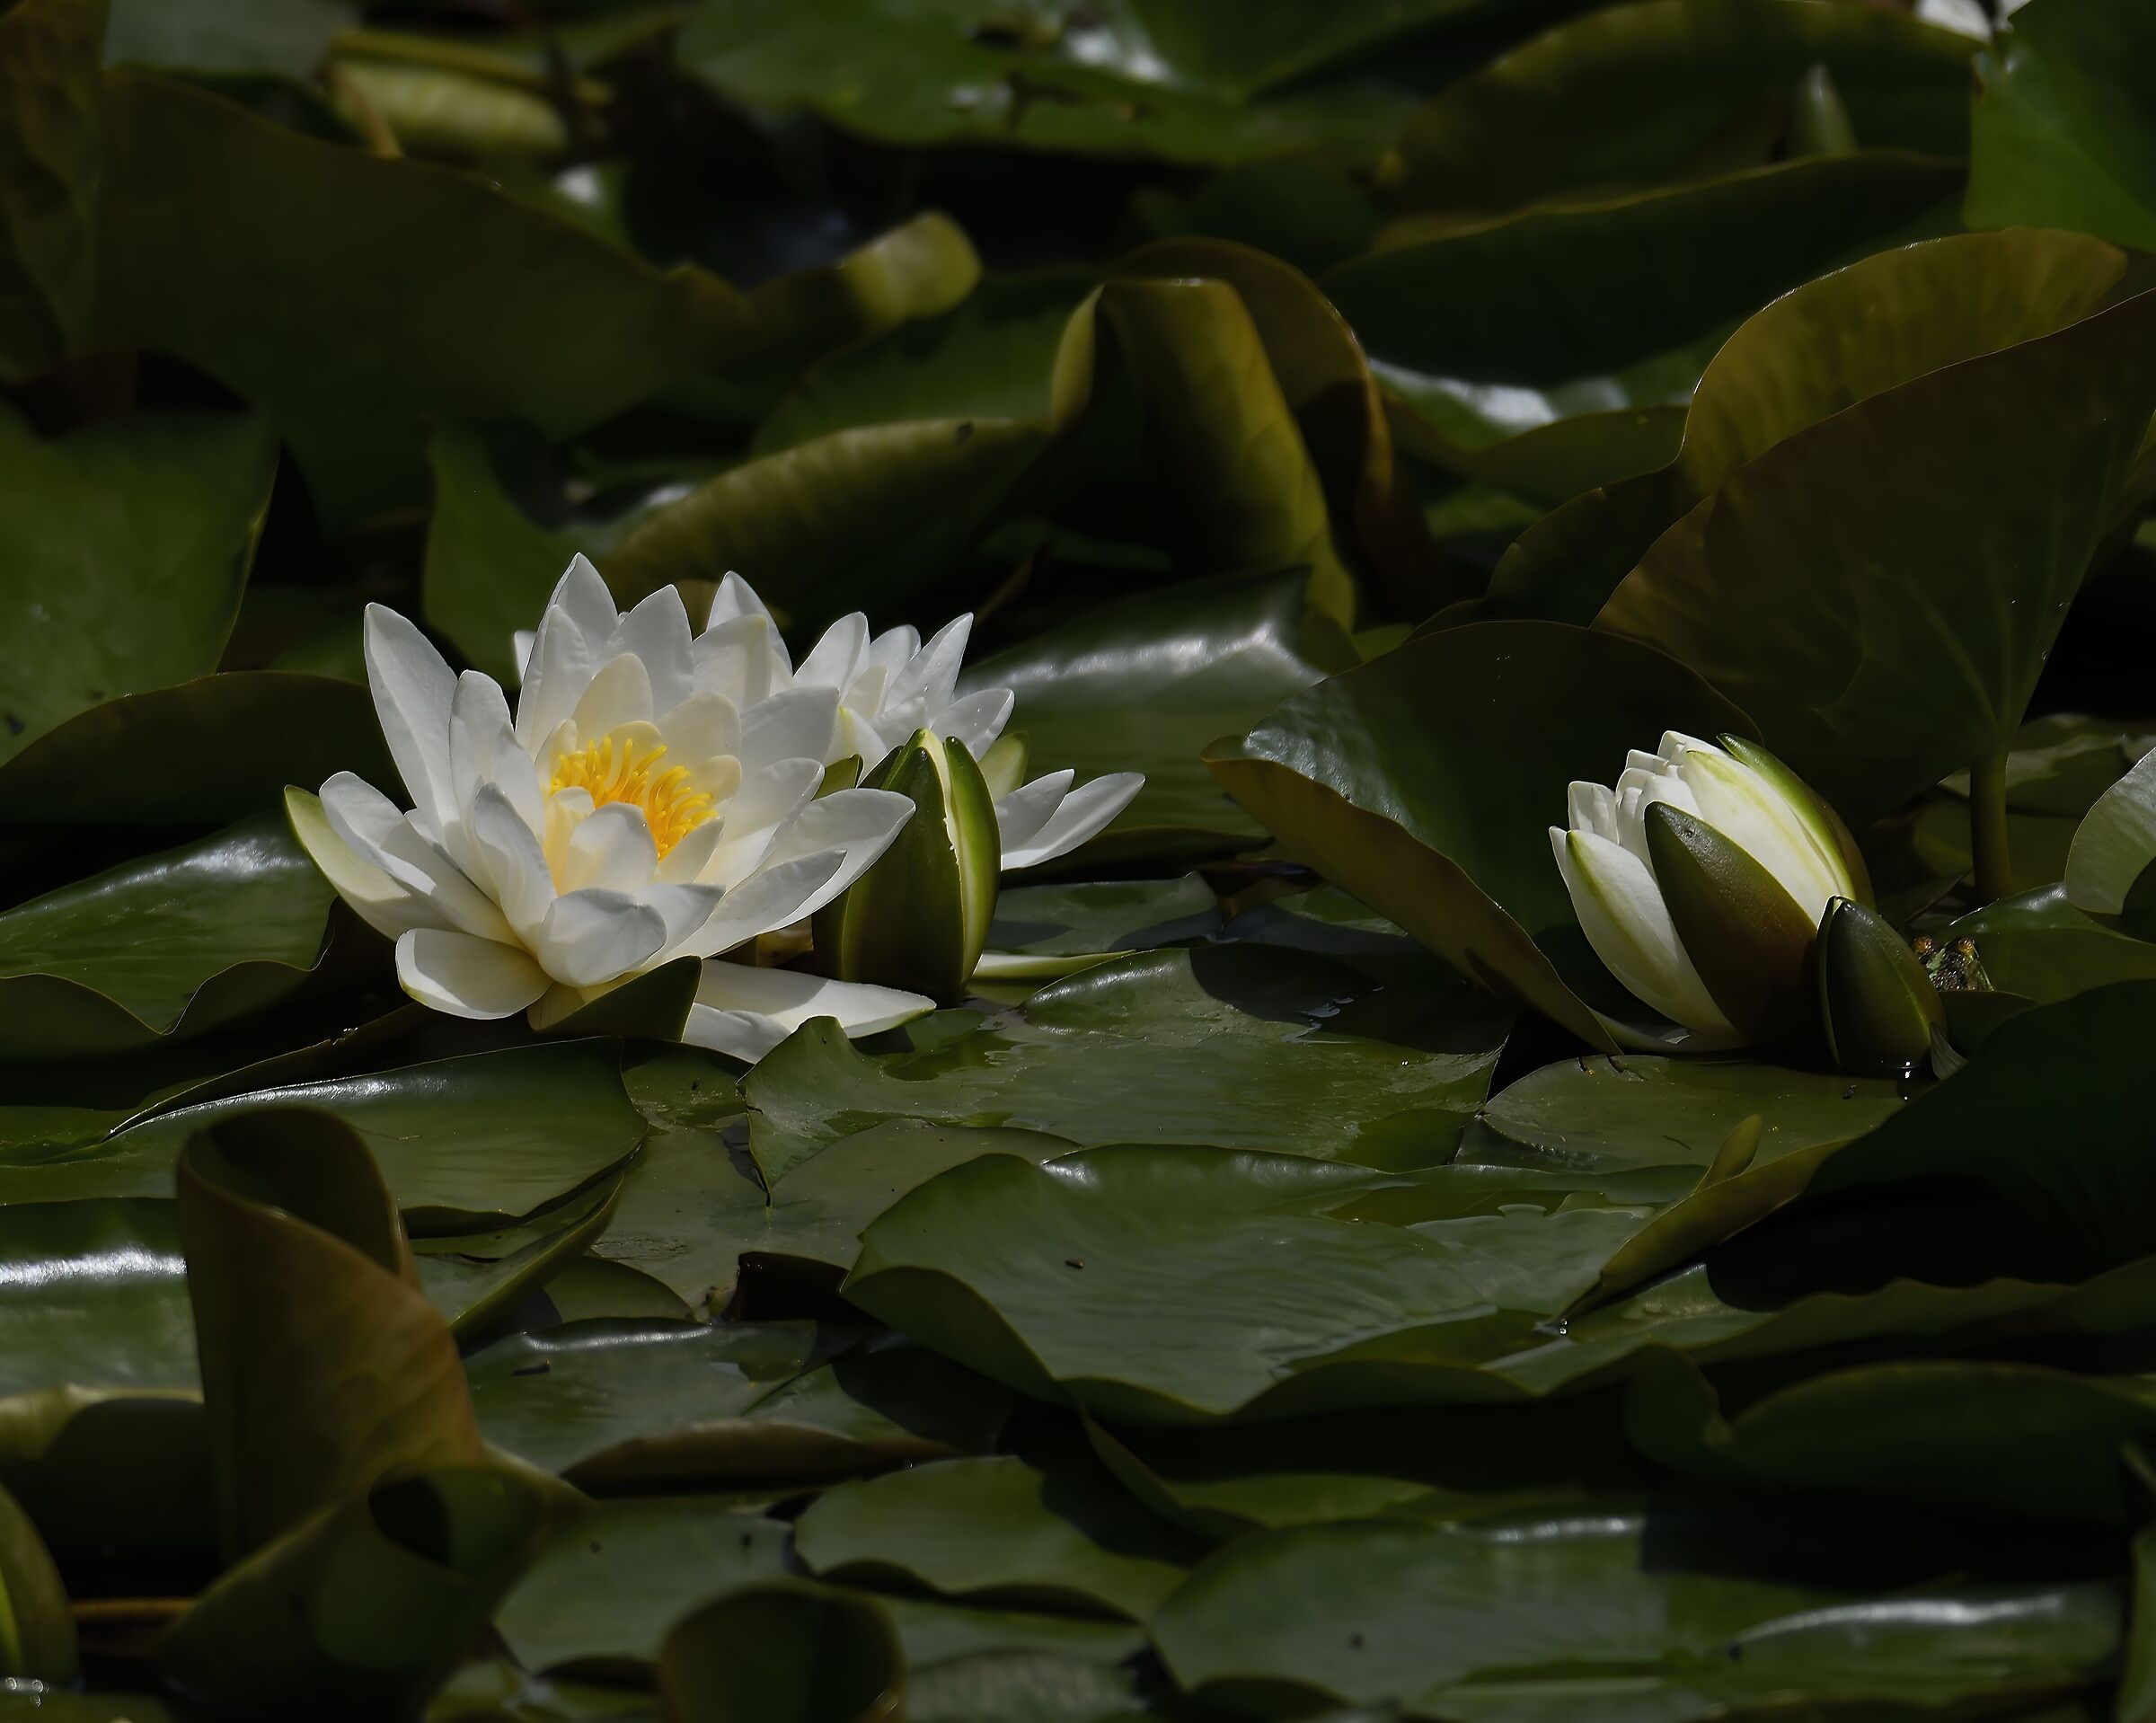 Water lilies at the pond...